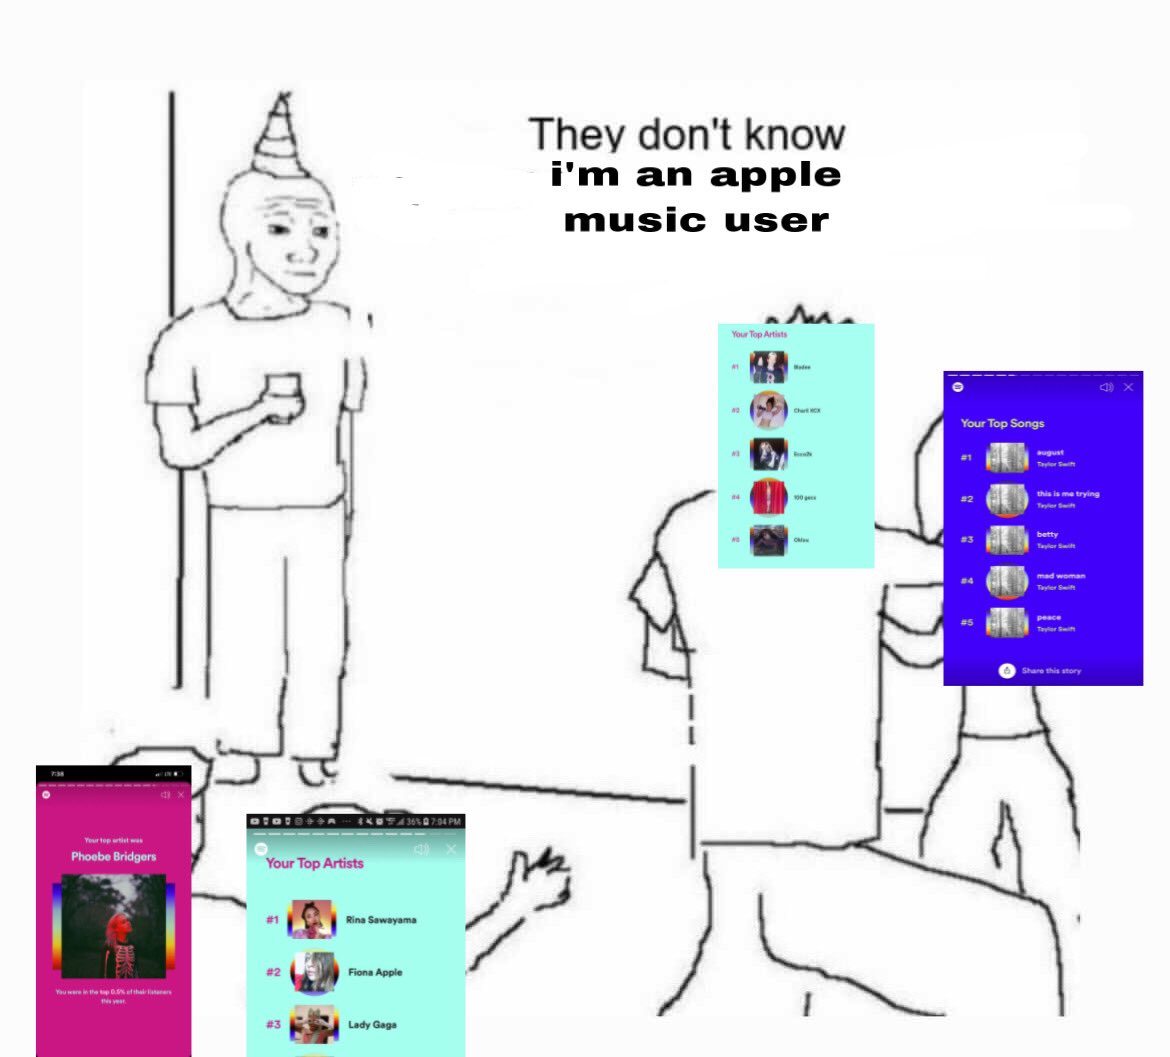 they dont know im wojak meme twitter - stirner at a party - They don't know i'm an apple music user Your Top Artists Your Top Songs gust this is me trying 32 betty Taylor Tayler pesce 054365 @ 2.94 Pm You tepat Phoebe Bridgers Your Top Artists Rina Sawaya